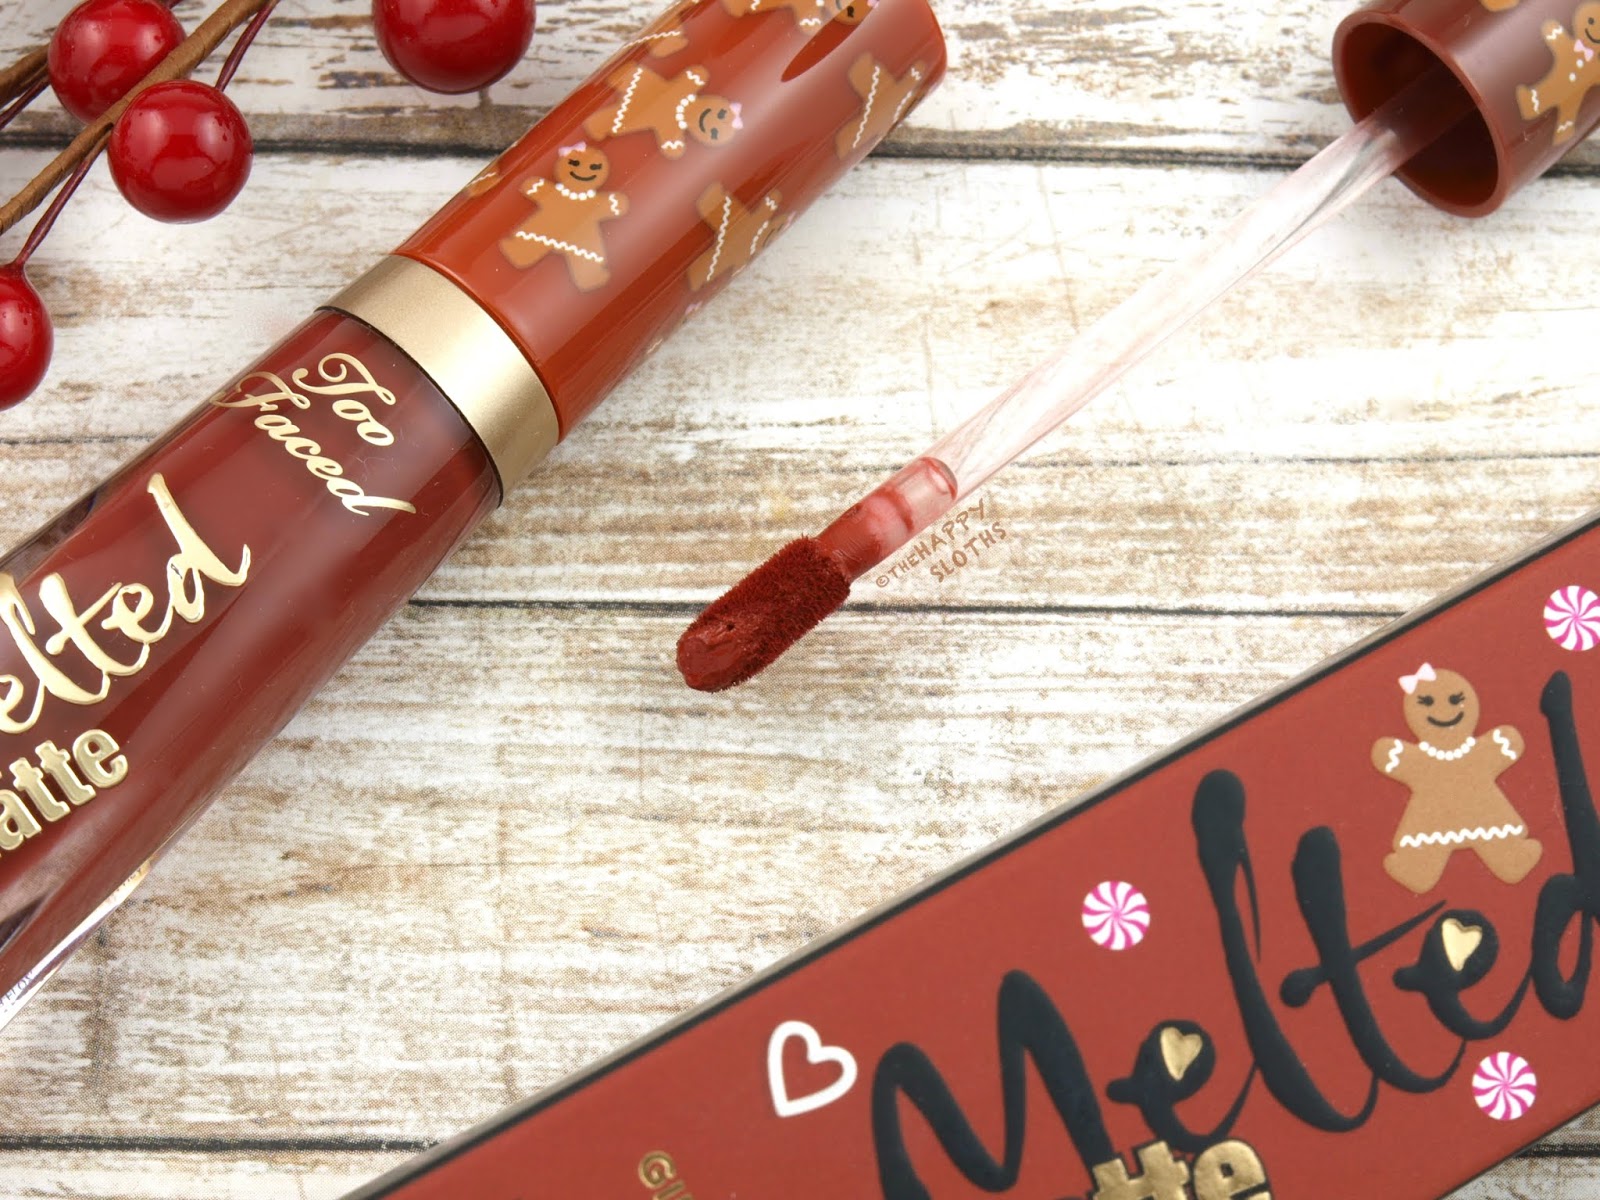 Too Faced | Melted Matte Liquified Long Wear Lipstick in "Gingerbread Girl" & "Gingerbread Man": Review and Swatches